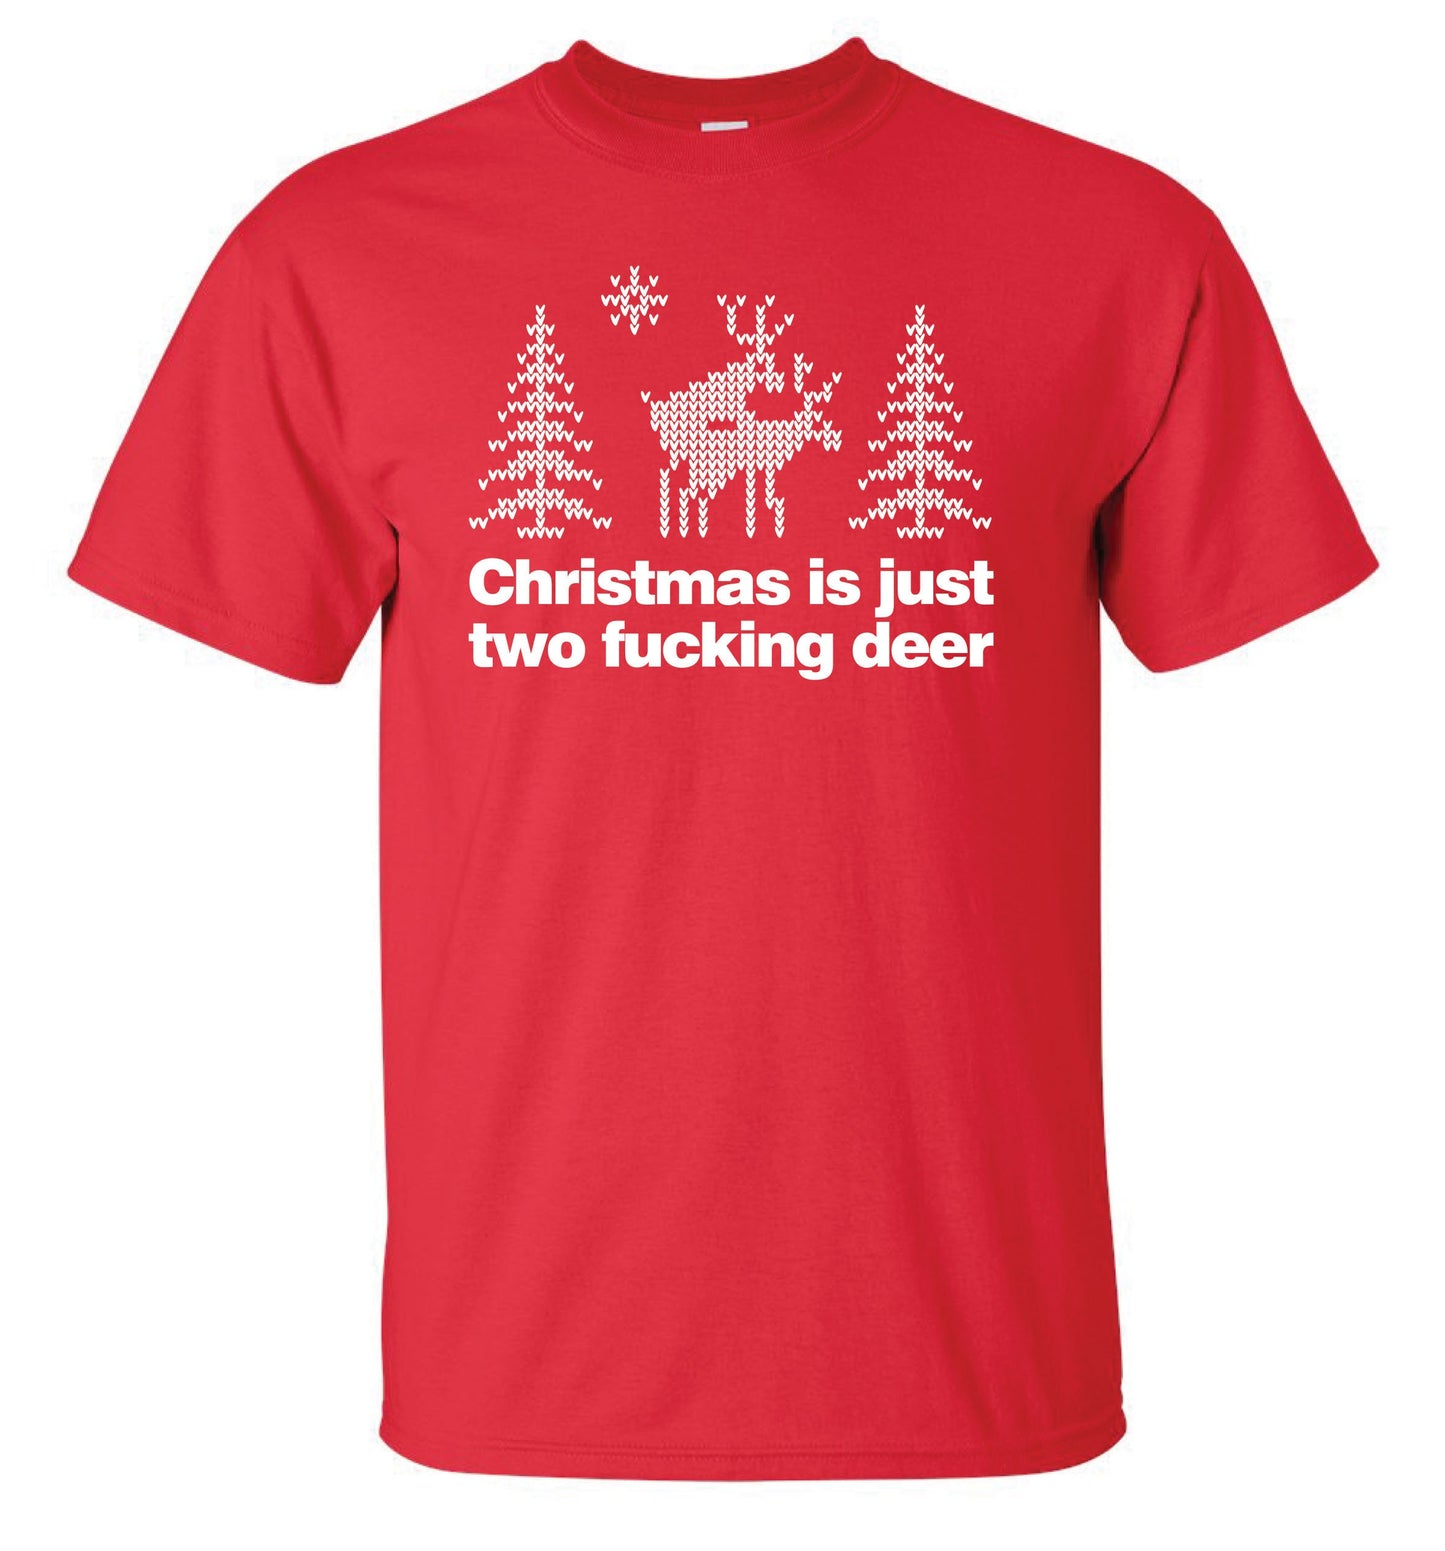 Christmas Is Just Two F***ing Deer T-shirt -Xmas Christmas Funny Cool Ladies or Mens (unisex)